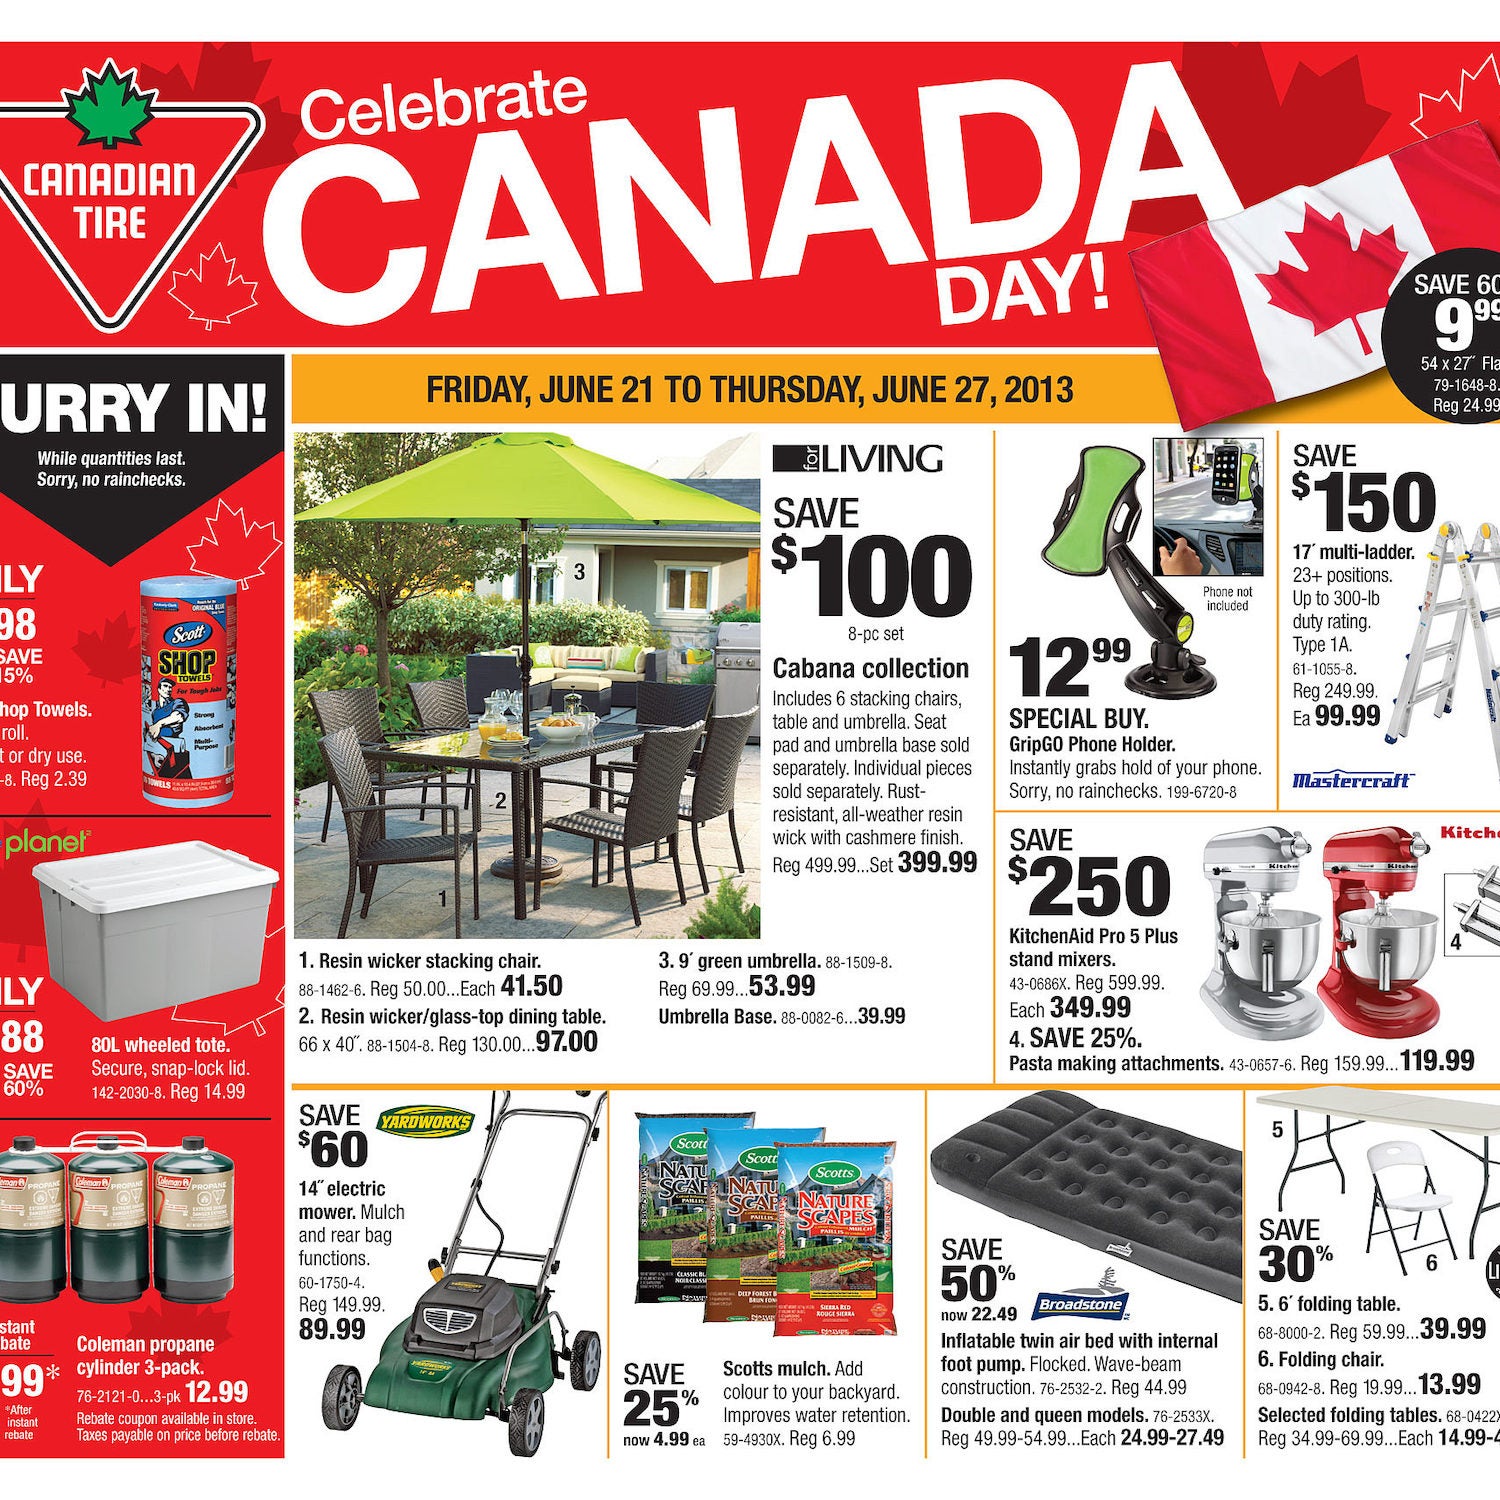 Canadian Tire Weekly Flyer 8 Day Event The Big Thanksgiving Sale Sep 27 Oct 4 Redflagdeals Com